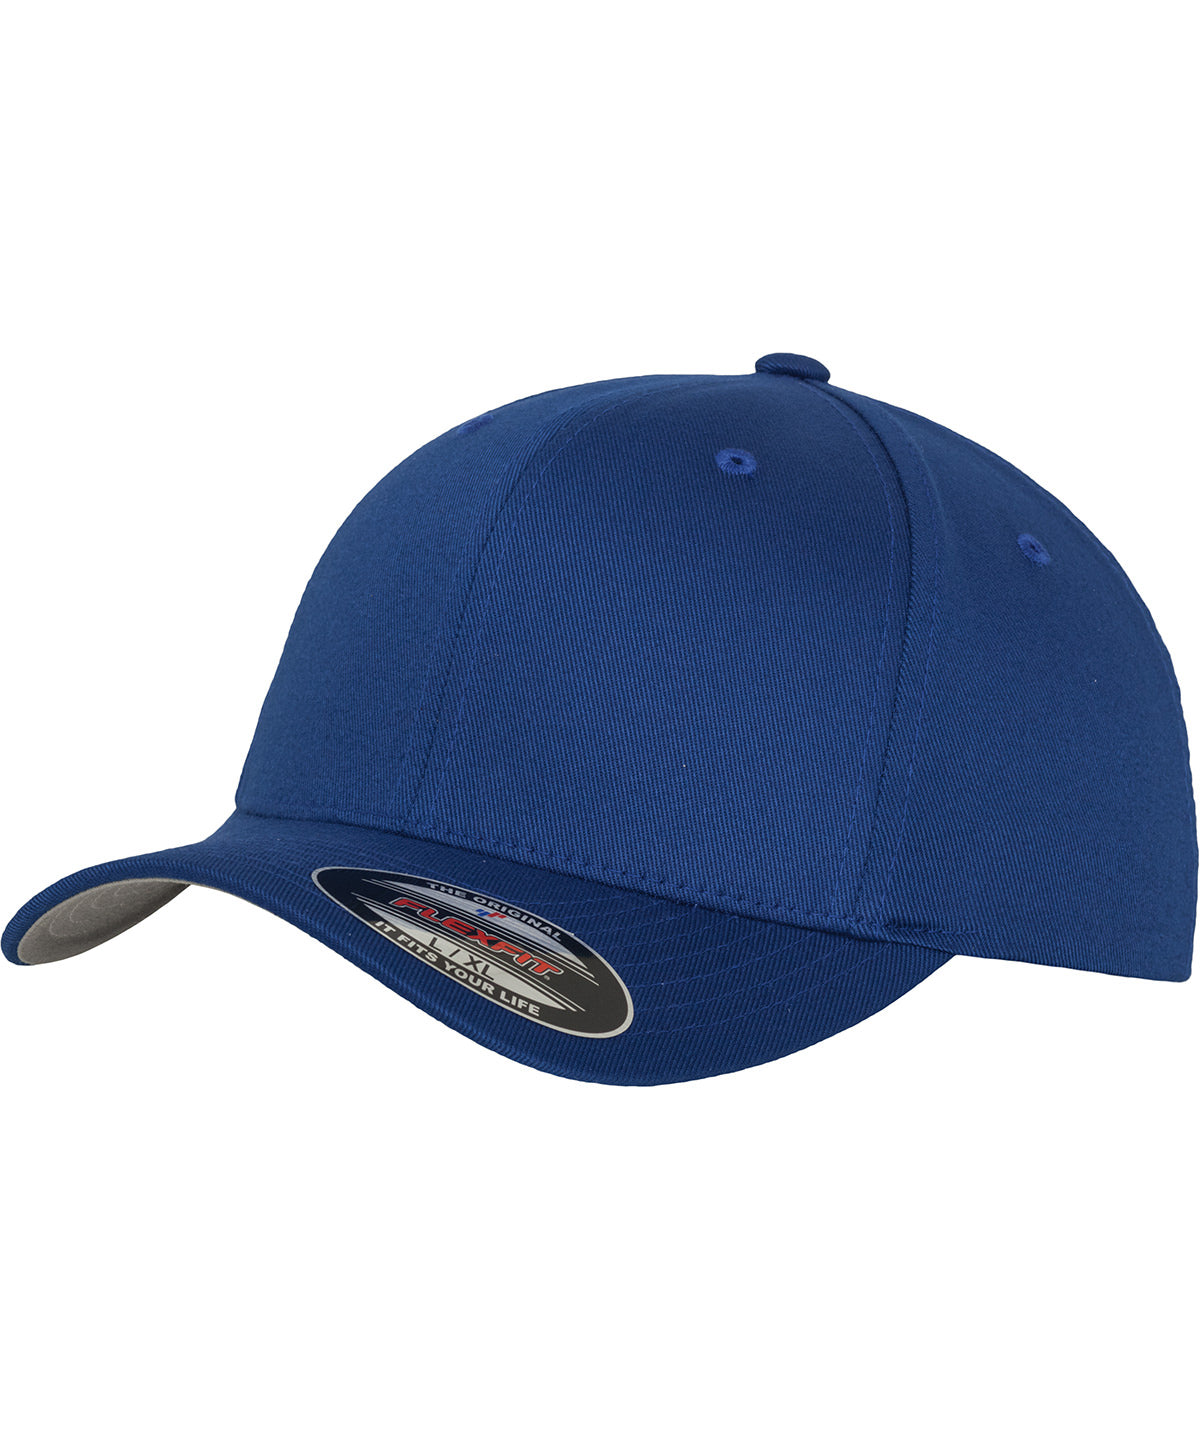 Royal - Flexfit fitted baseball cap (6277) Caps Flexfit by Yupoong 2022 Spring Edit, Headwear, Must Haves, New Colours for 2023, Rebrandable, Summer Accessories Schoolwear Centres